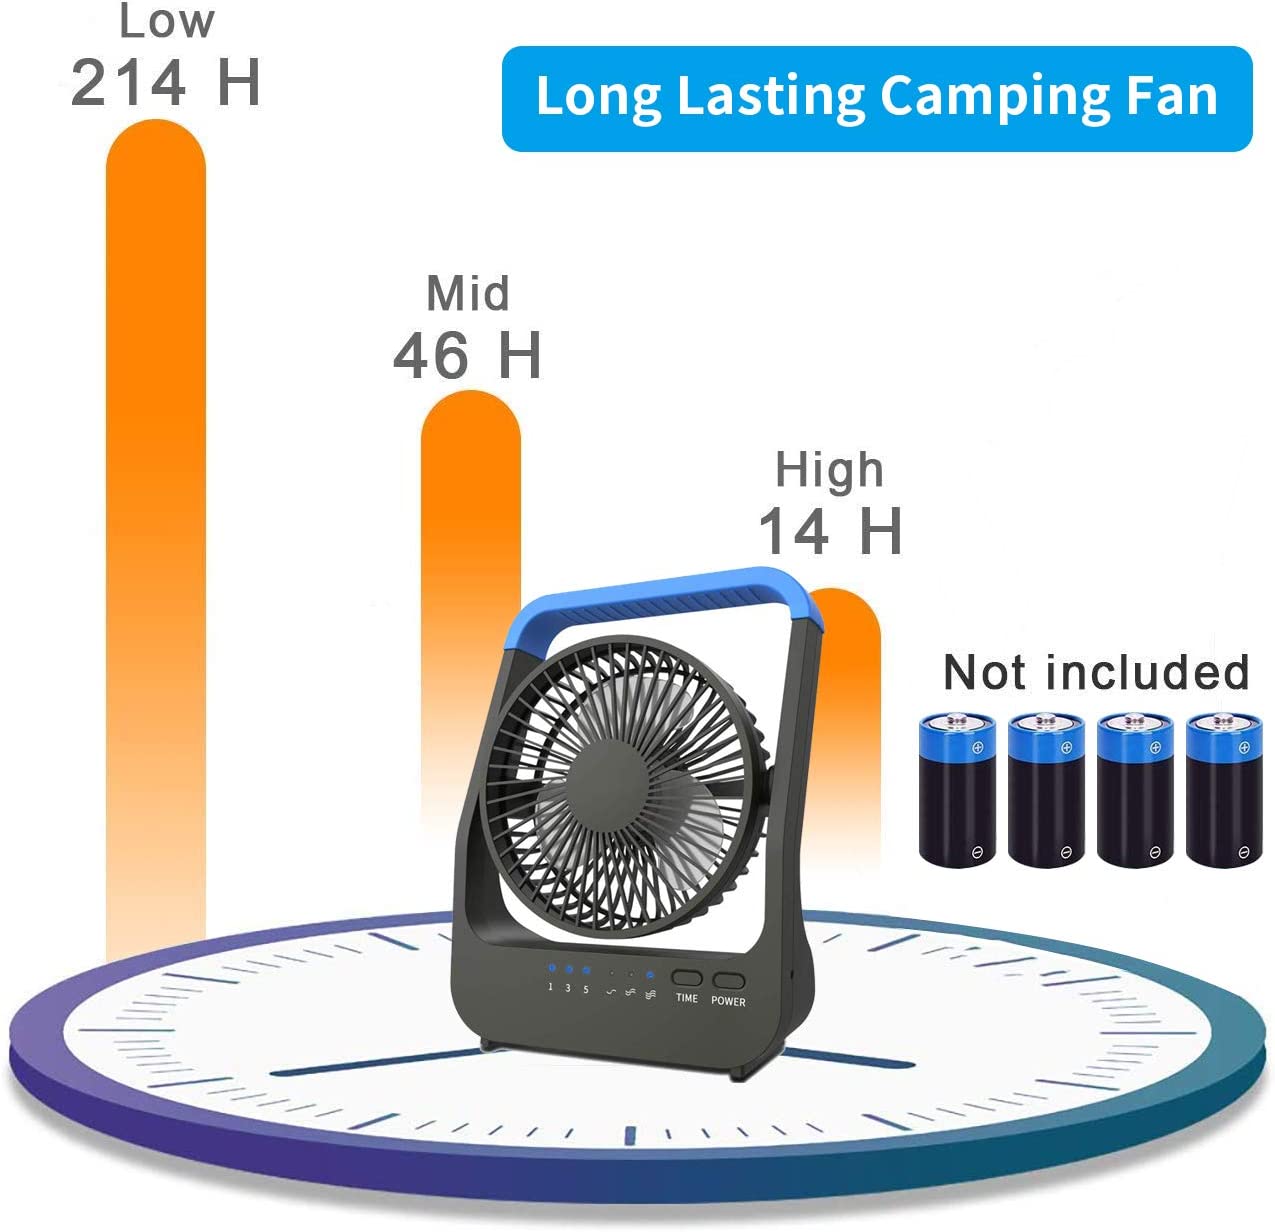 USB Powered Desk Fan Whisper Quiet Desk Fan with Timer Super Long Lasting Battery Operated Fans for Office,Bedroom,Outdoor